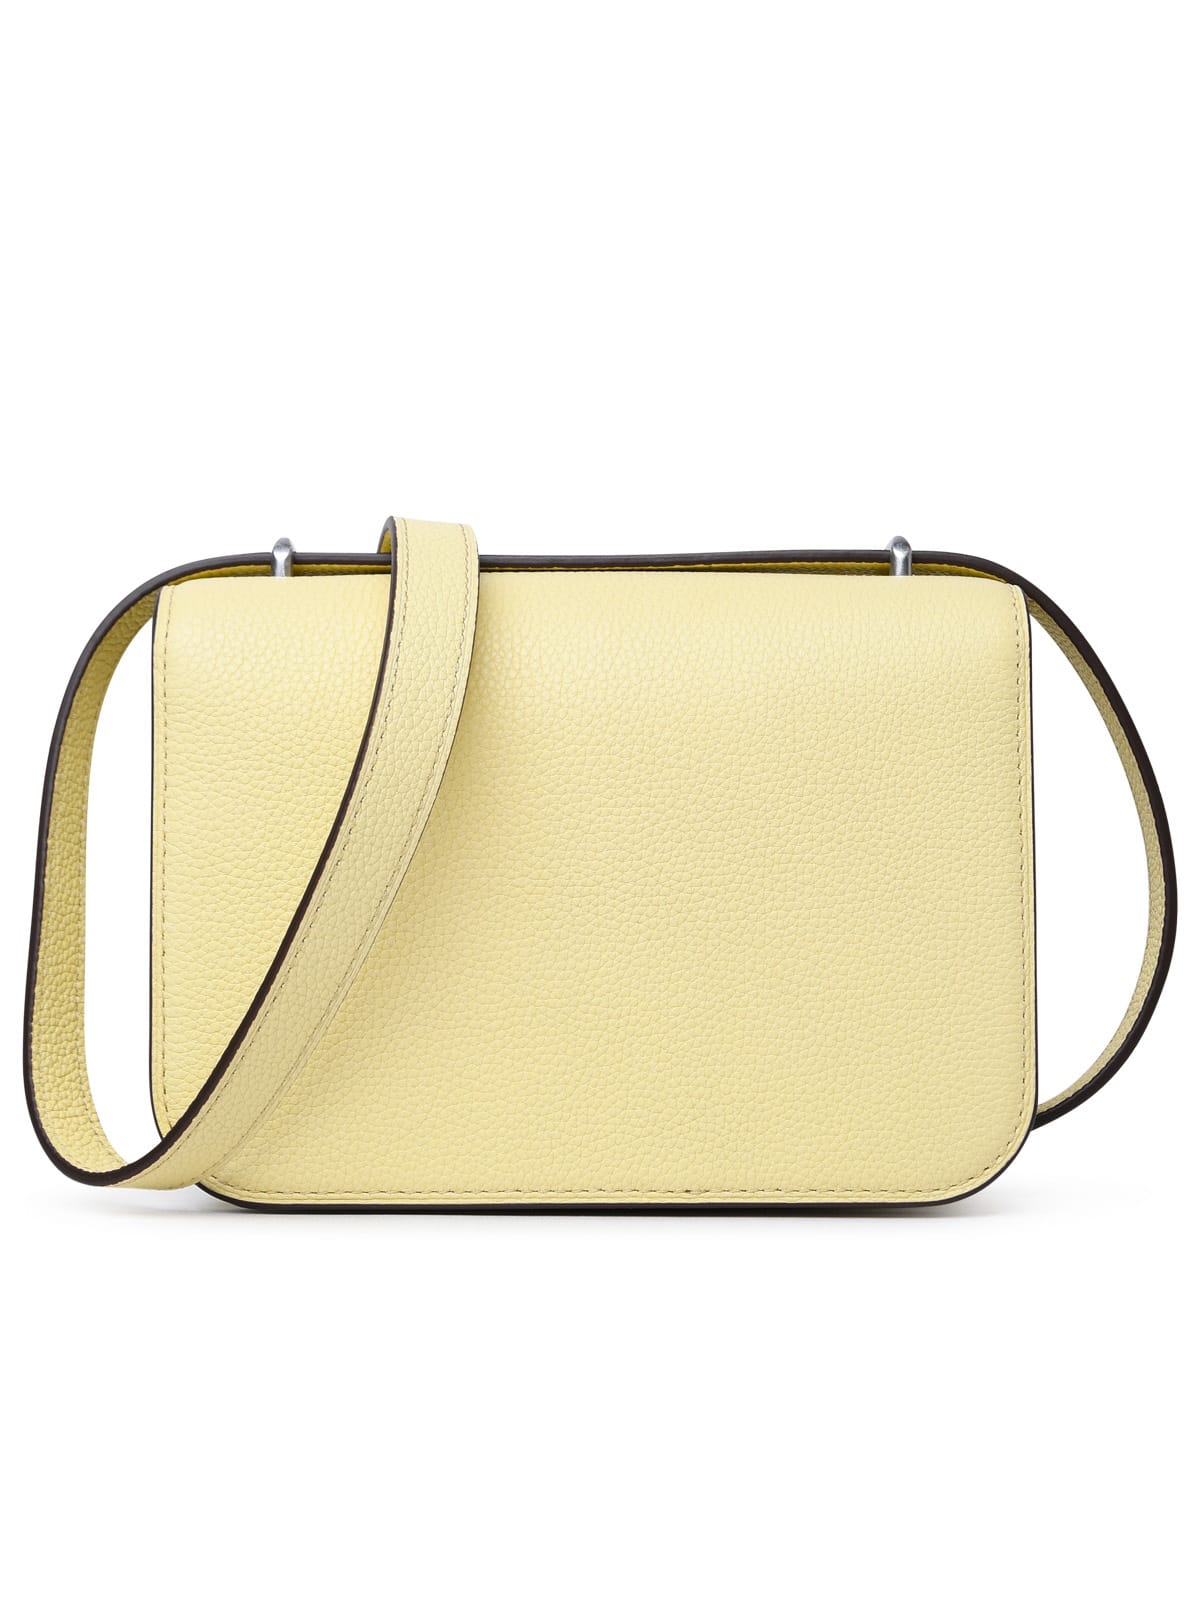 Shop Tory Burch Small Eleanor Yellow Leather Bag